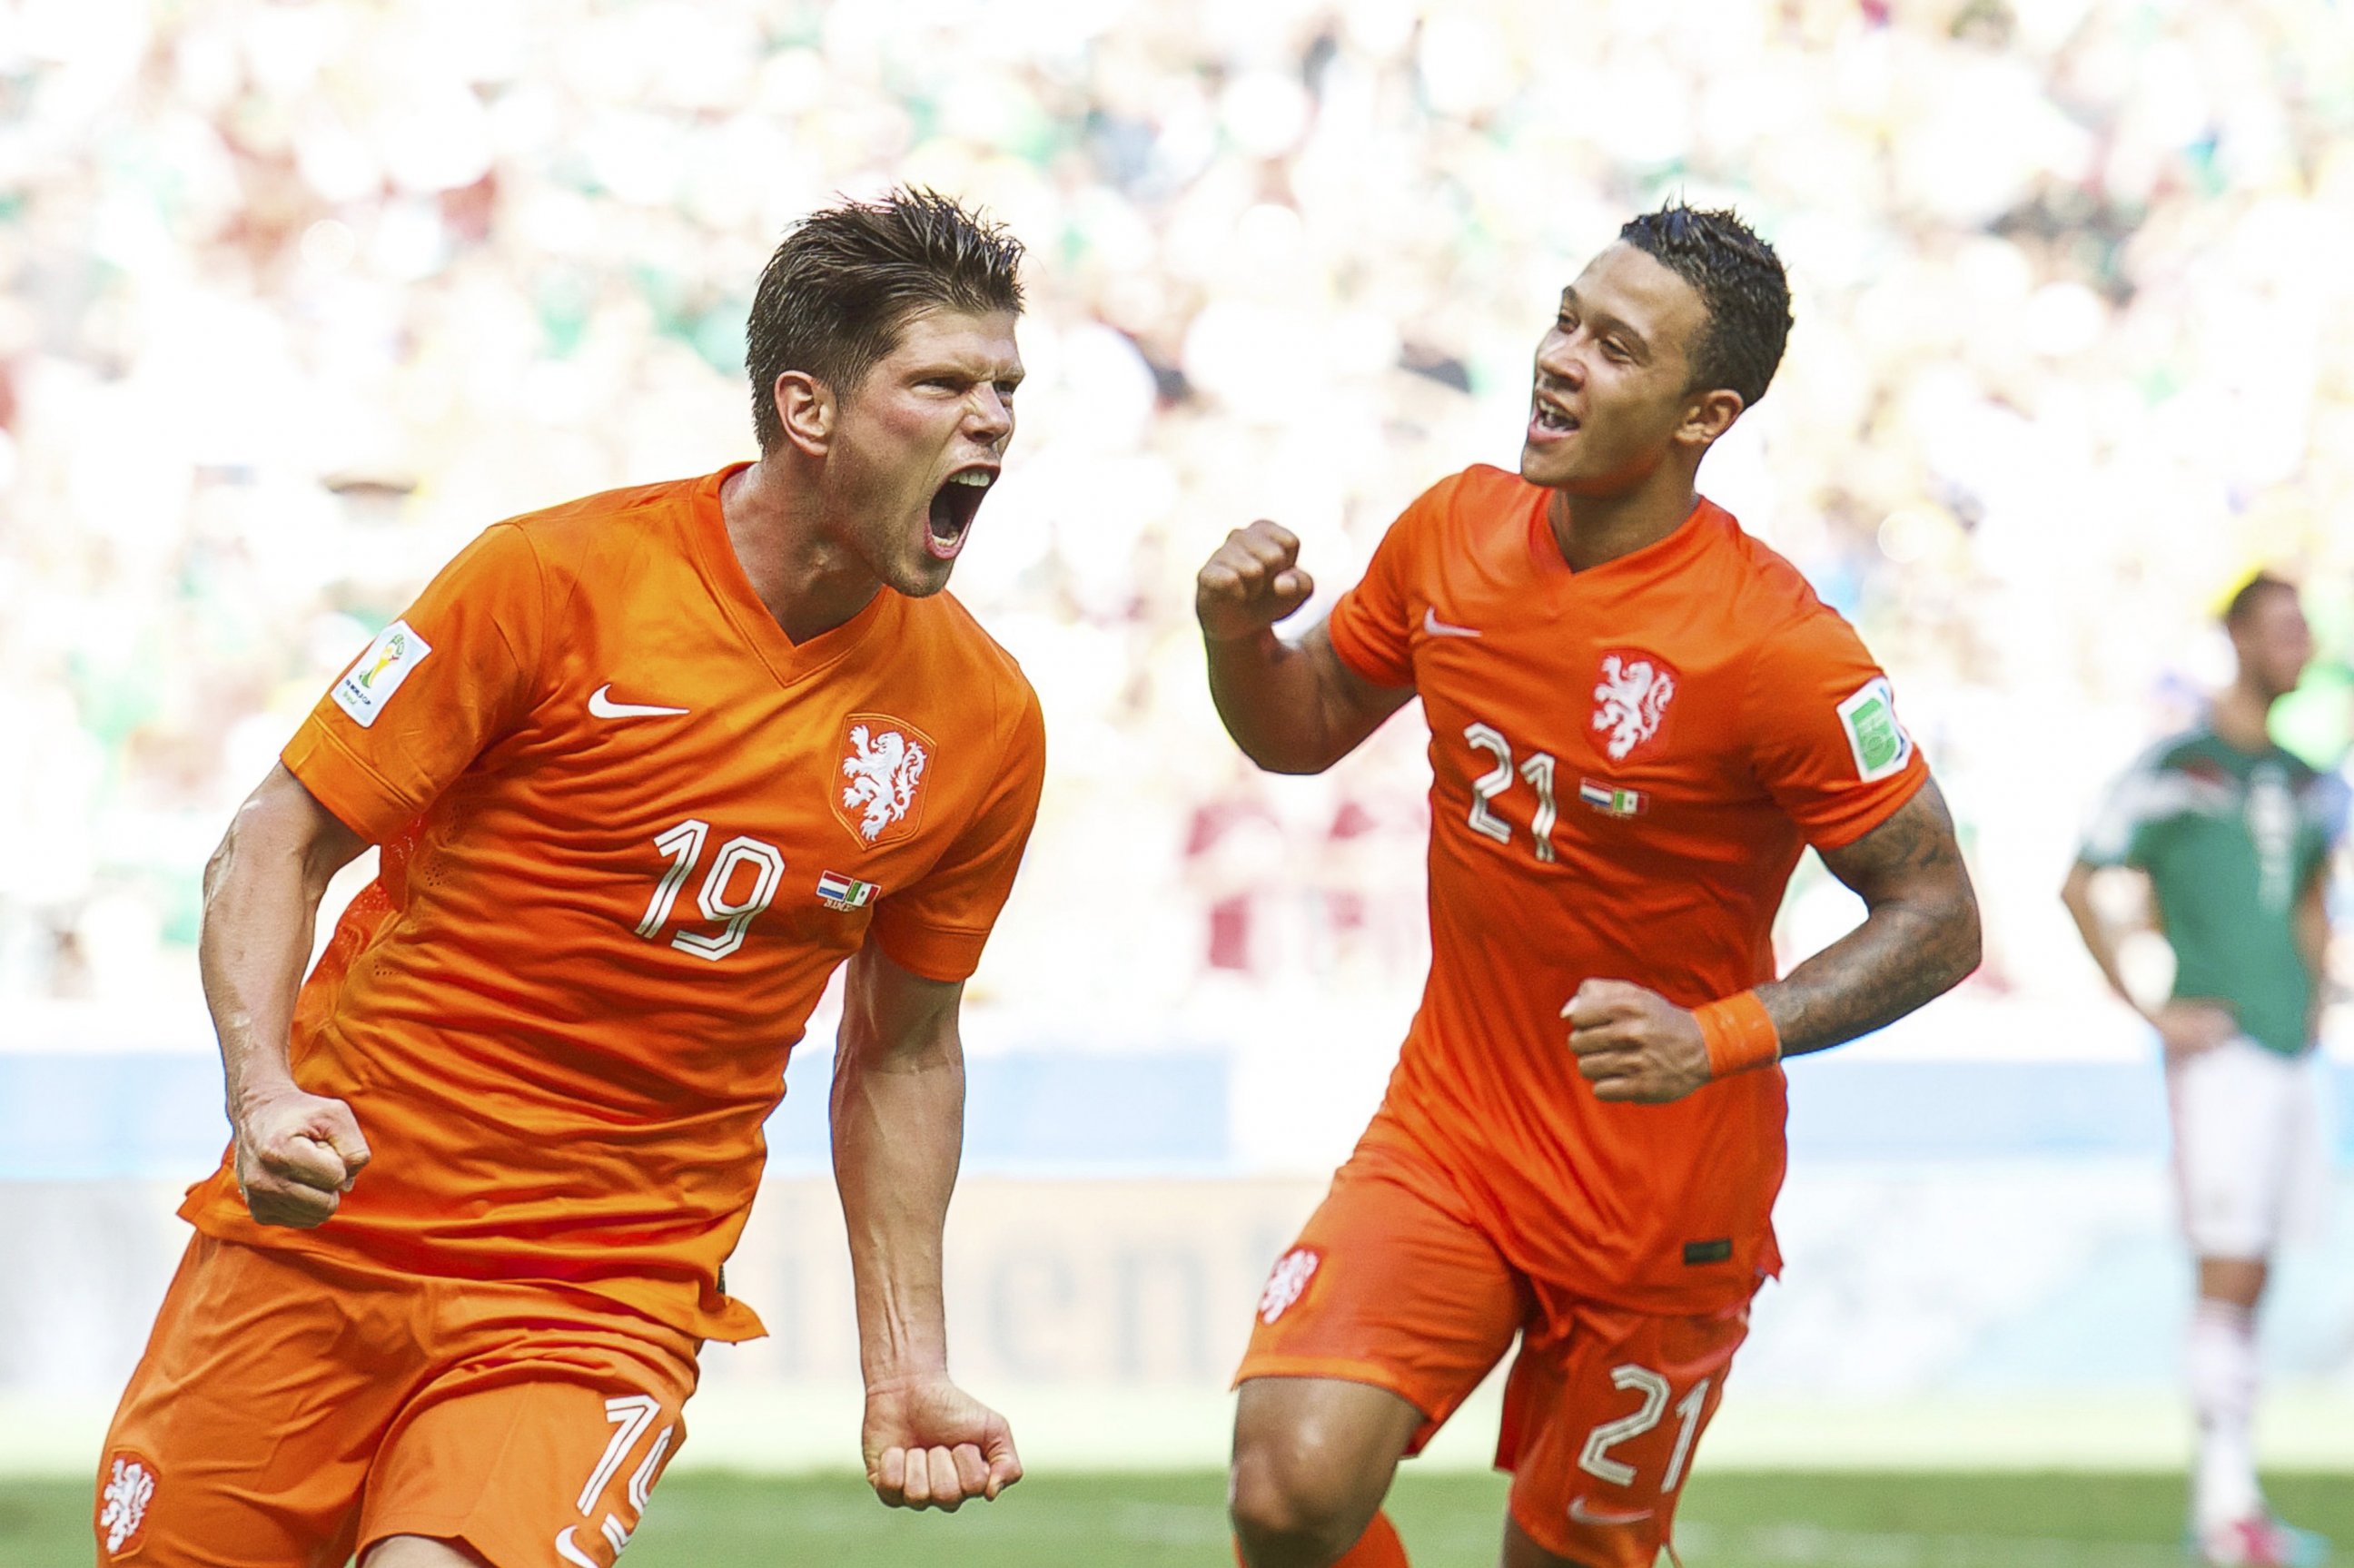 PHOTO: Klaas-Jan Huntelaar and Memphis Depay of Holland during the match between The Netherlands and Mexico on June 29, 2014 at Estadio Castelao in Fortaleza, Brazil.